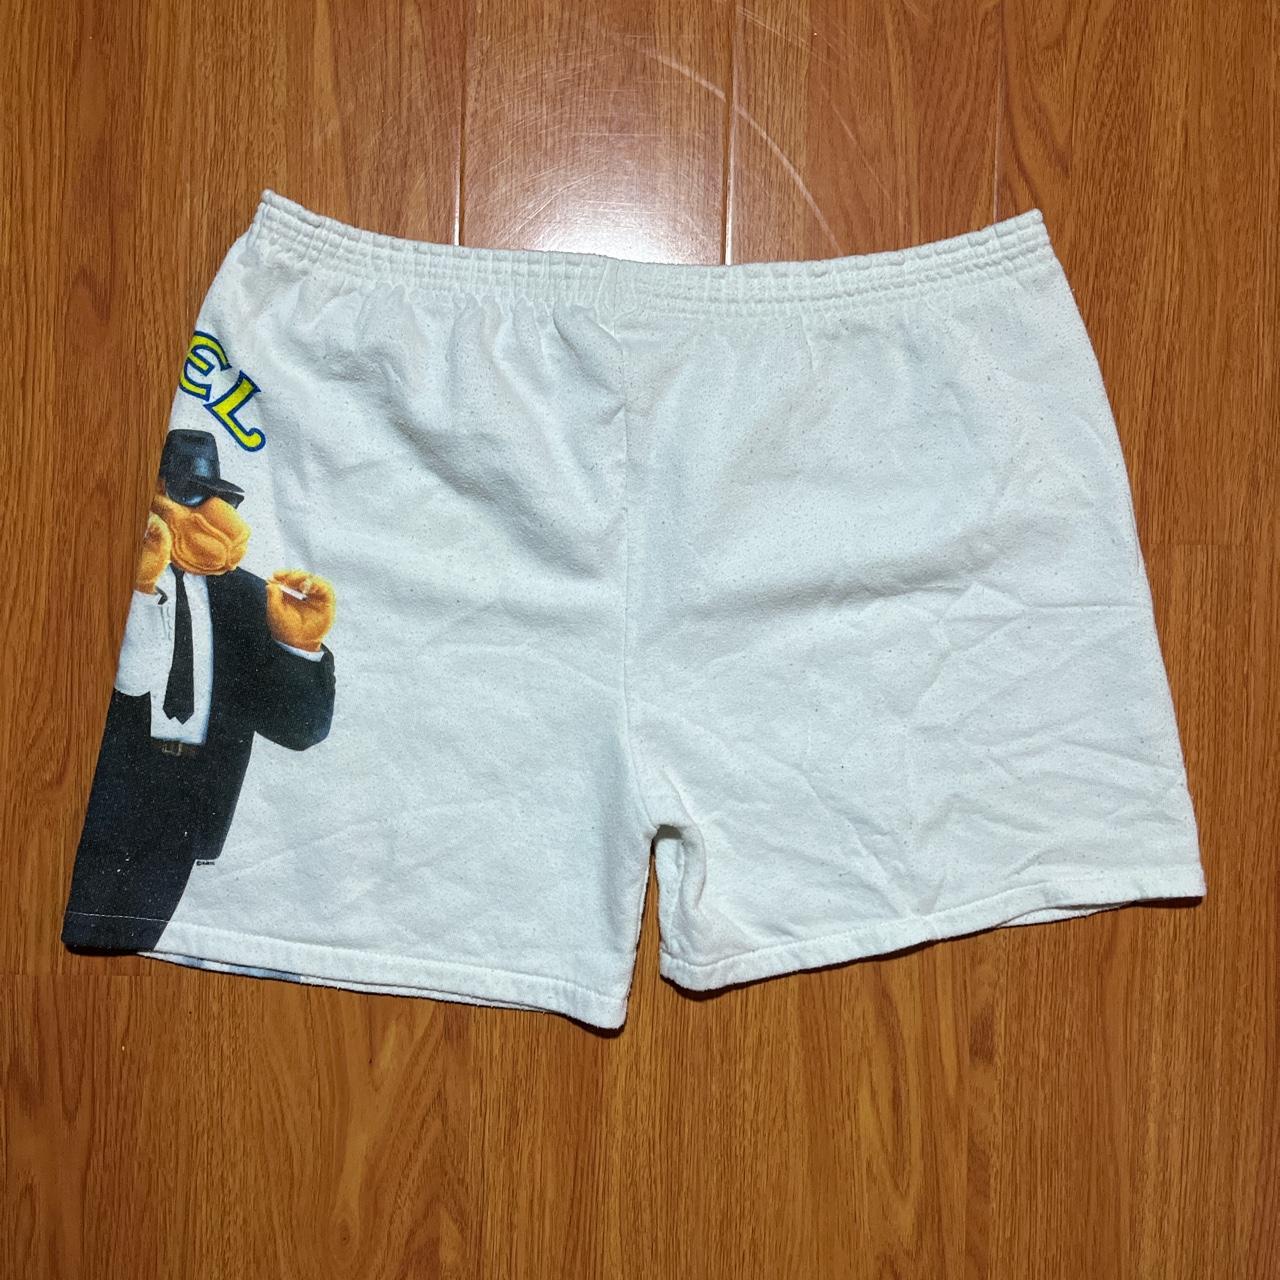 Camel Men's White and Yellow Shorts (3)